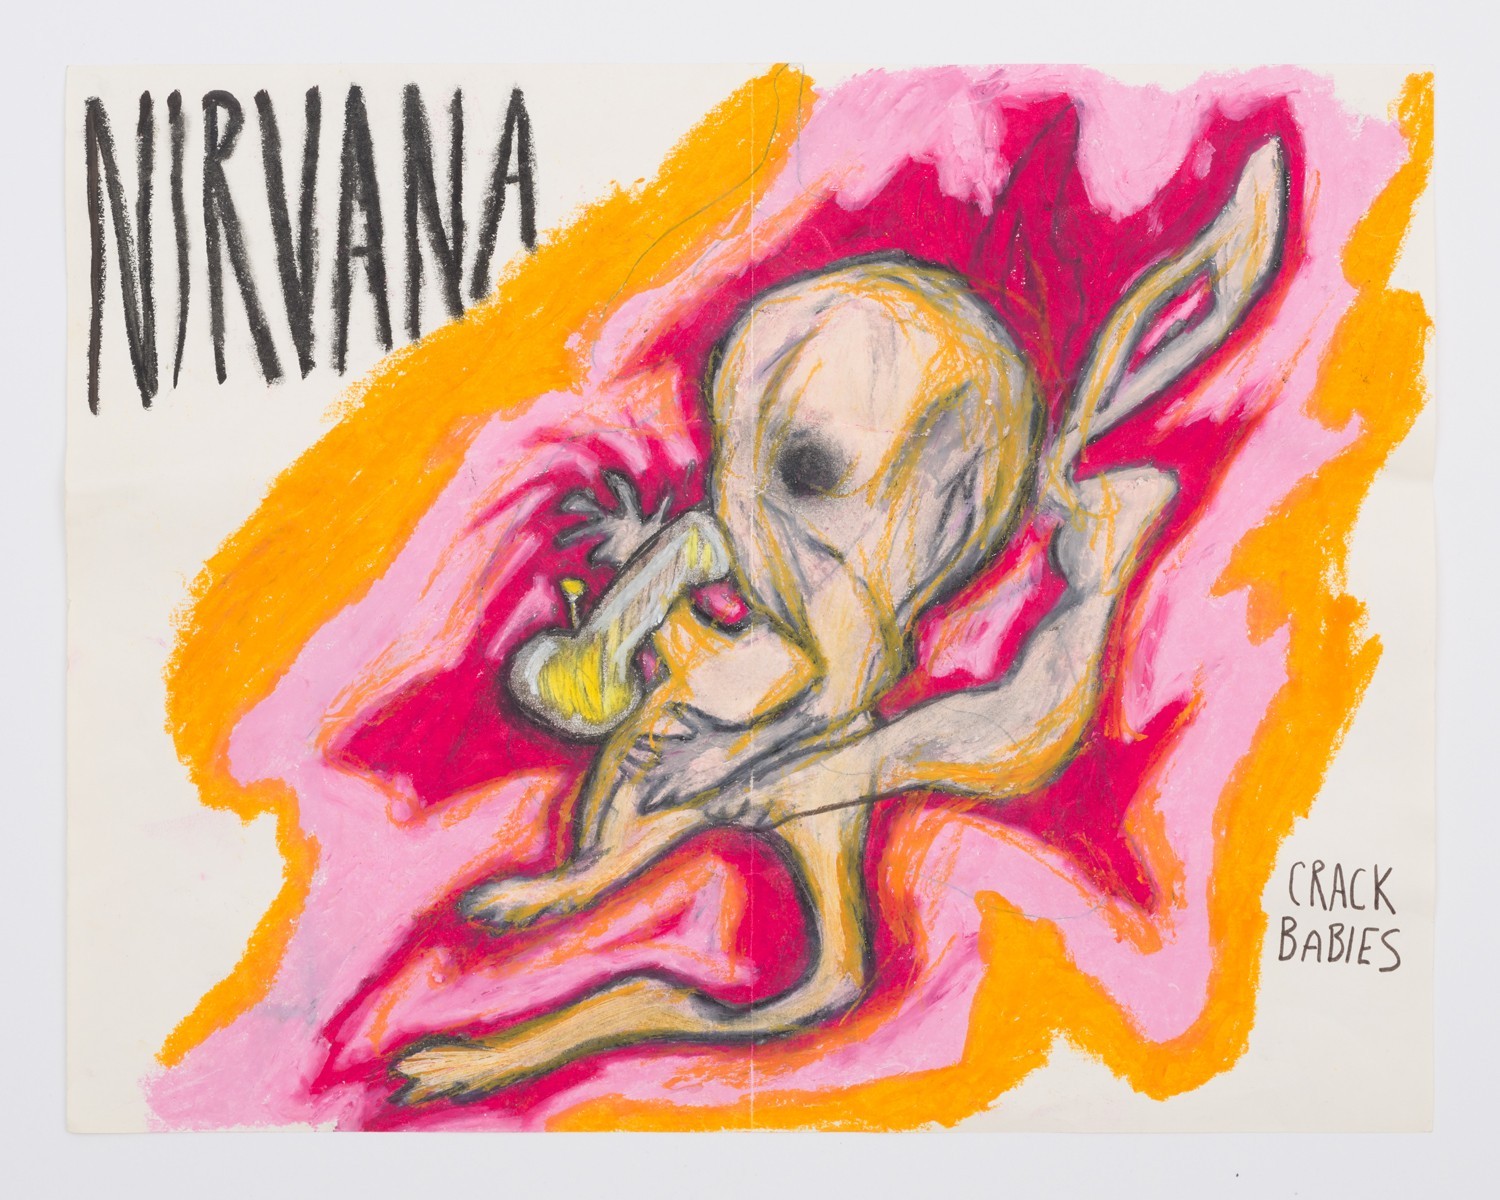 Perhaps his most notable works are the many record covers he designed for Nirvana. These were based on Kurt Cobain’s paintings, drawings and photography, particularly the covers of albums like Nevermind and single releases like for Lithium and Heart-Shaped Box.